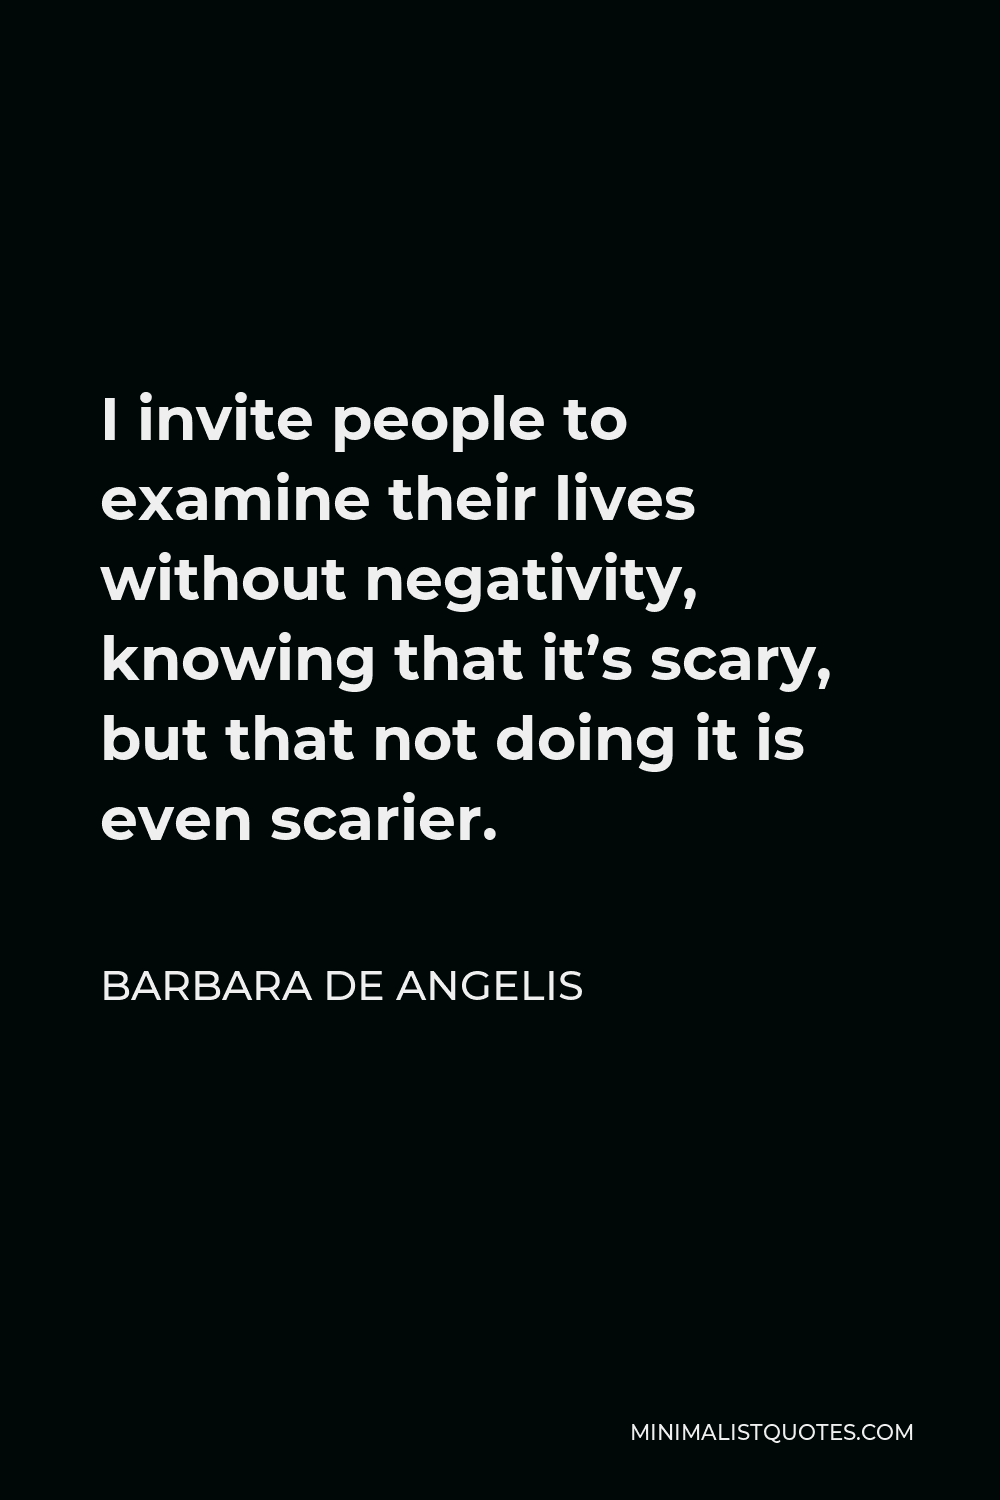 Barbara De Angelis Quote - I invite people to examine their lives without negativity, knowing that it’s scary, but that not doing it is even scarier.